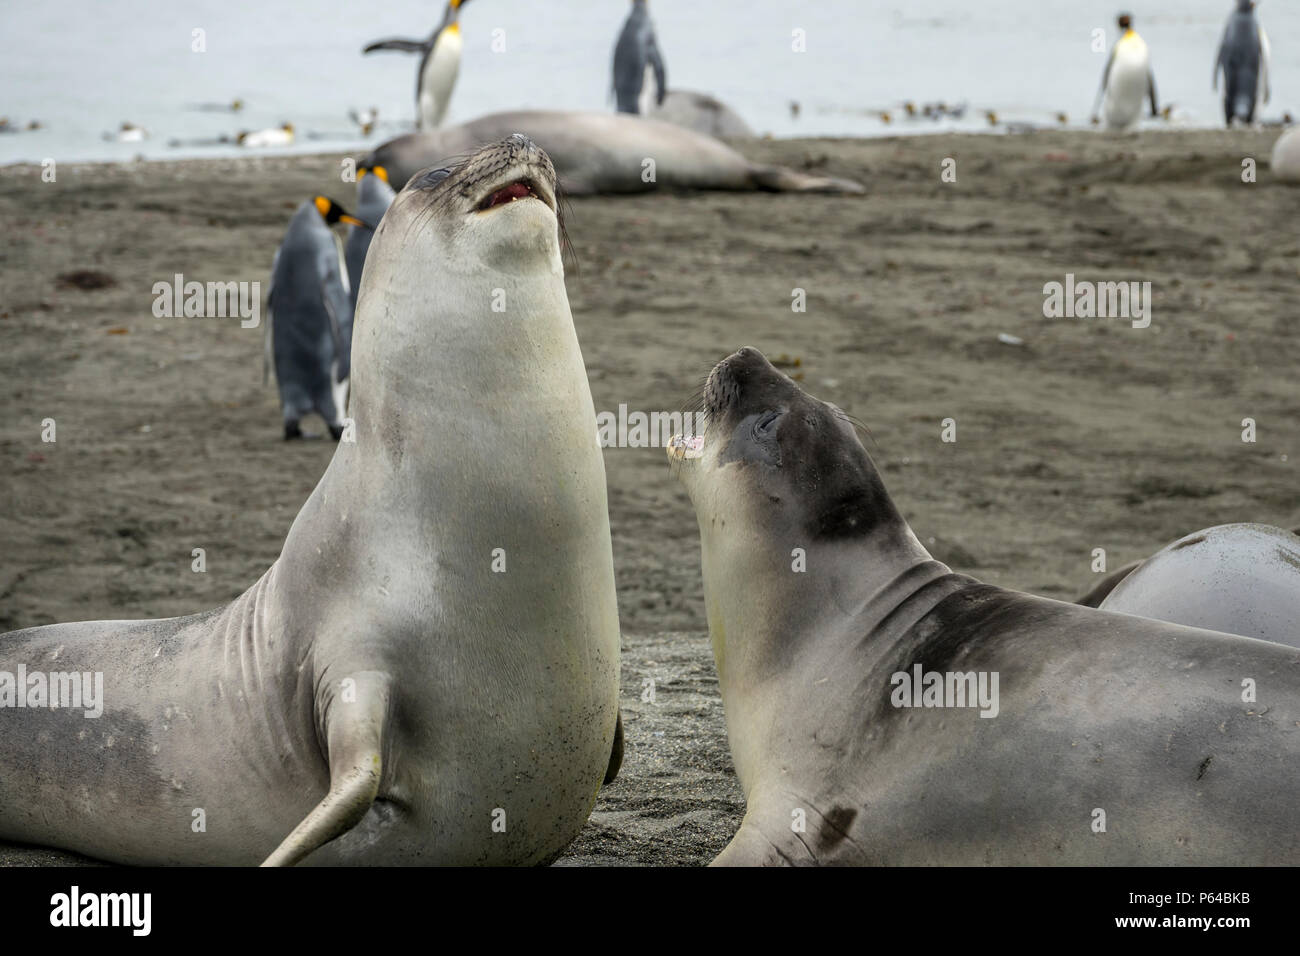 Sparring weaner southern elephant seals, St Andrew's Bay, South Georgia Stock Photo